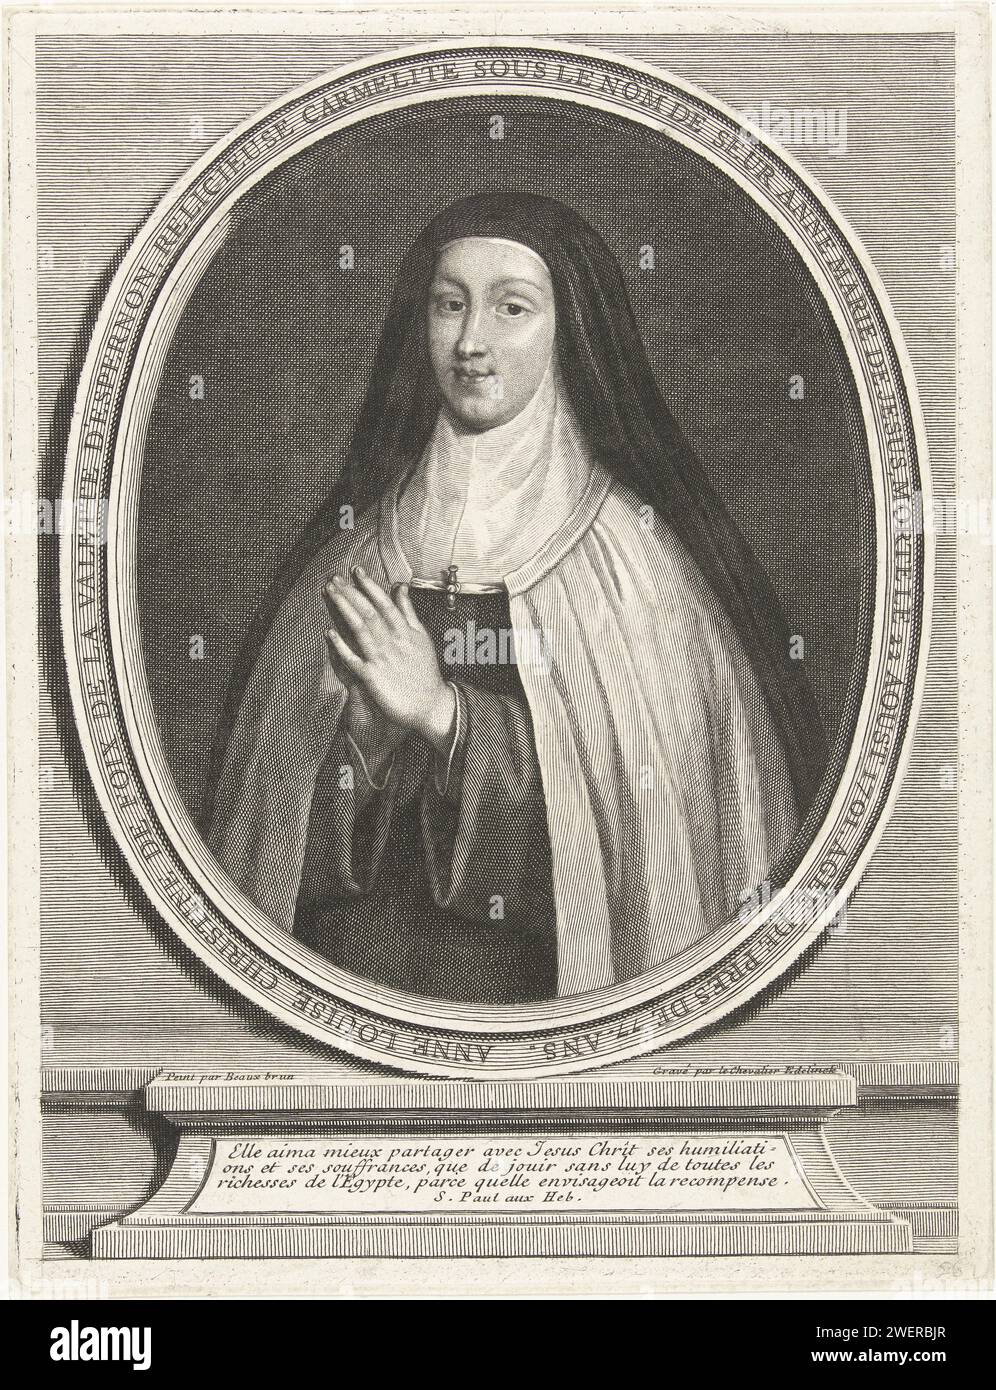 Portret van Anne-Louise-Christine de Foix de la Valette d'Epernon, Gerard Edelinck, After Charles Beaubrun, 1652-1707 print Portrait of Karmelietes Sister Anne-Louise-Christine de Foix de la Valette d'Epernon (1622-1701). Displayed with your hands together, in oval frame with text, including three lines of Latin.  paper engraving Stock Photo